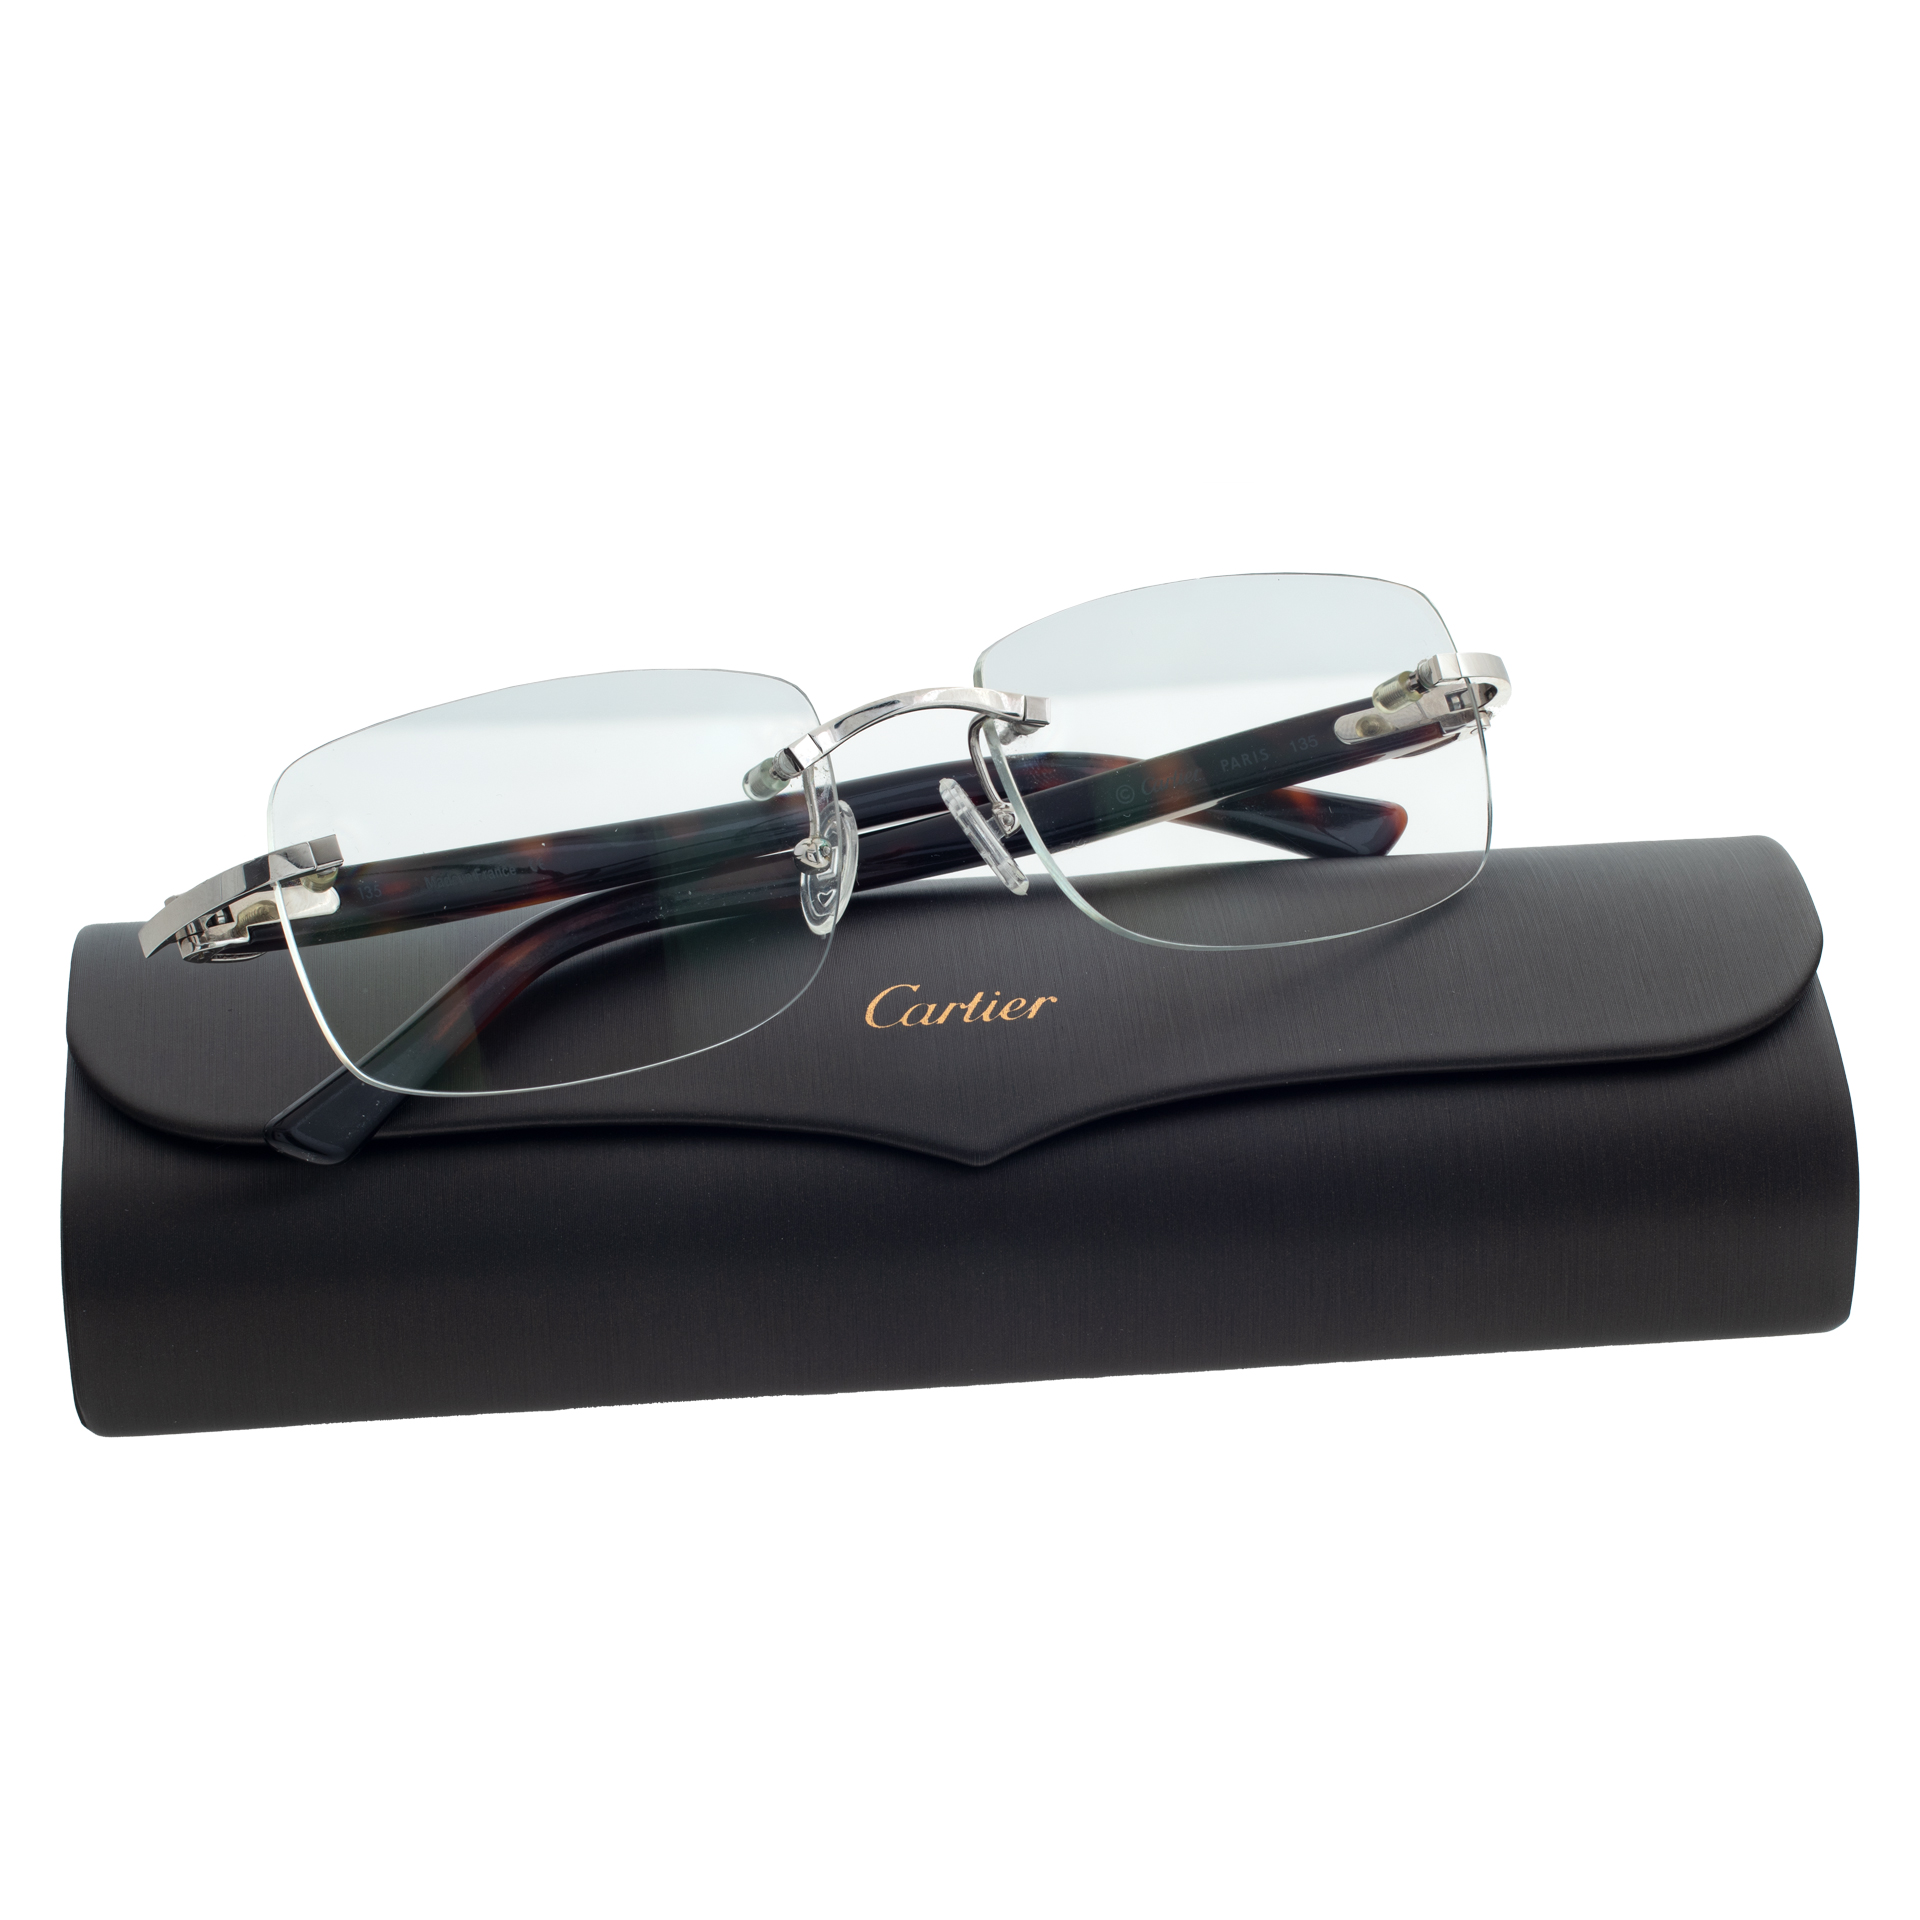 Cartier rimless eyeglasses with tortoise shell temples image 2